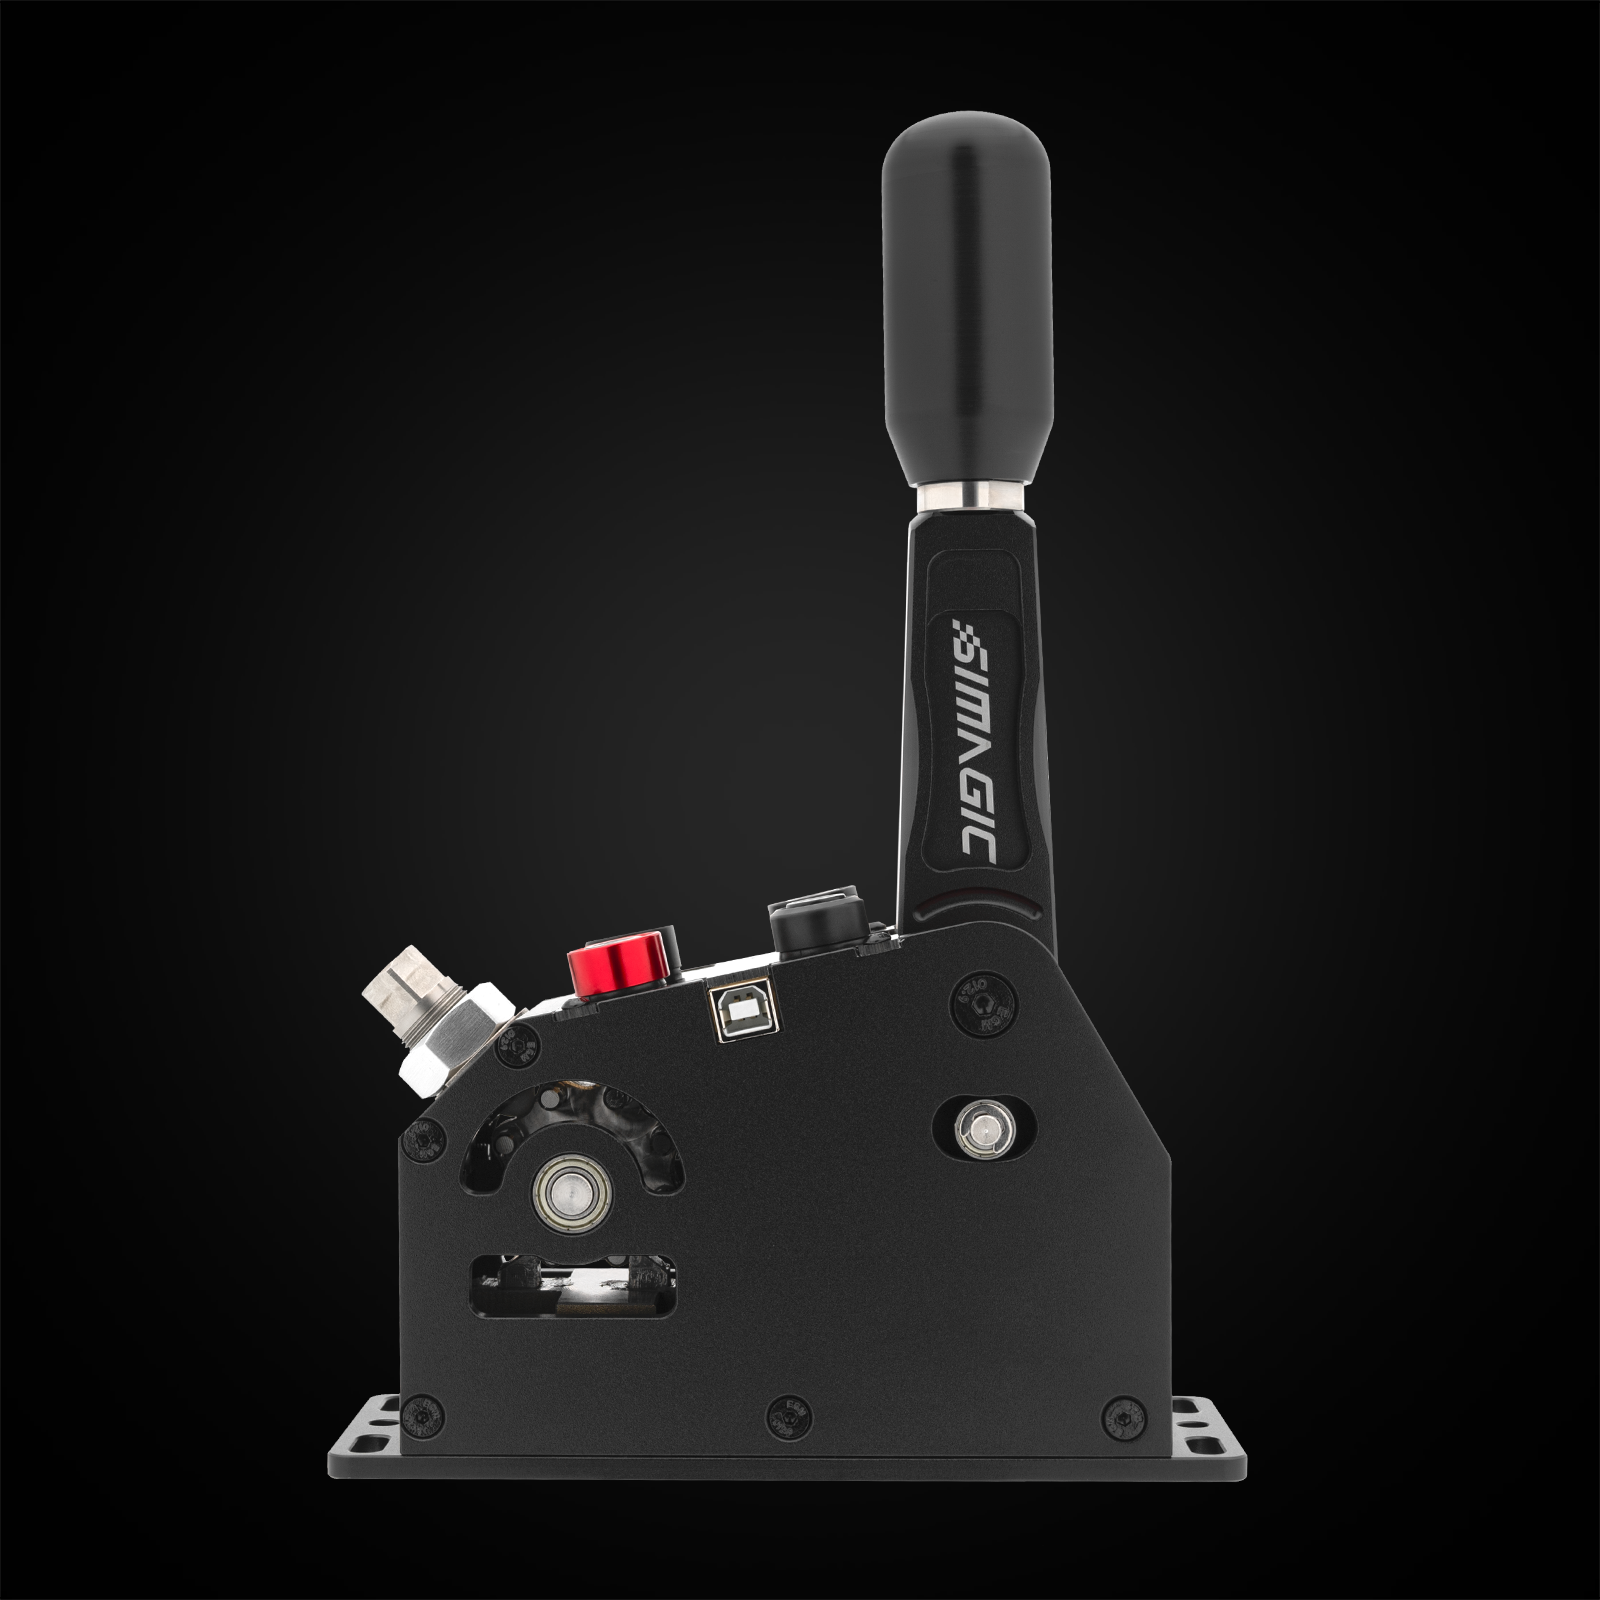 SIMAGIC Sequential shifter Q1S （PRE ORDER）